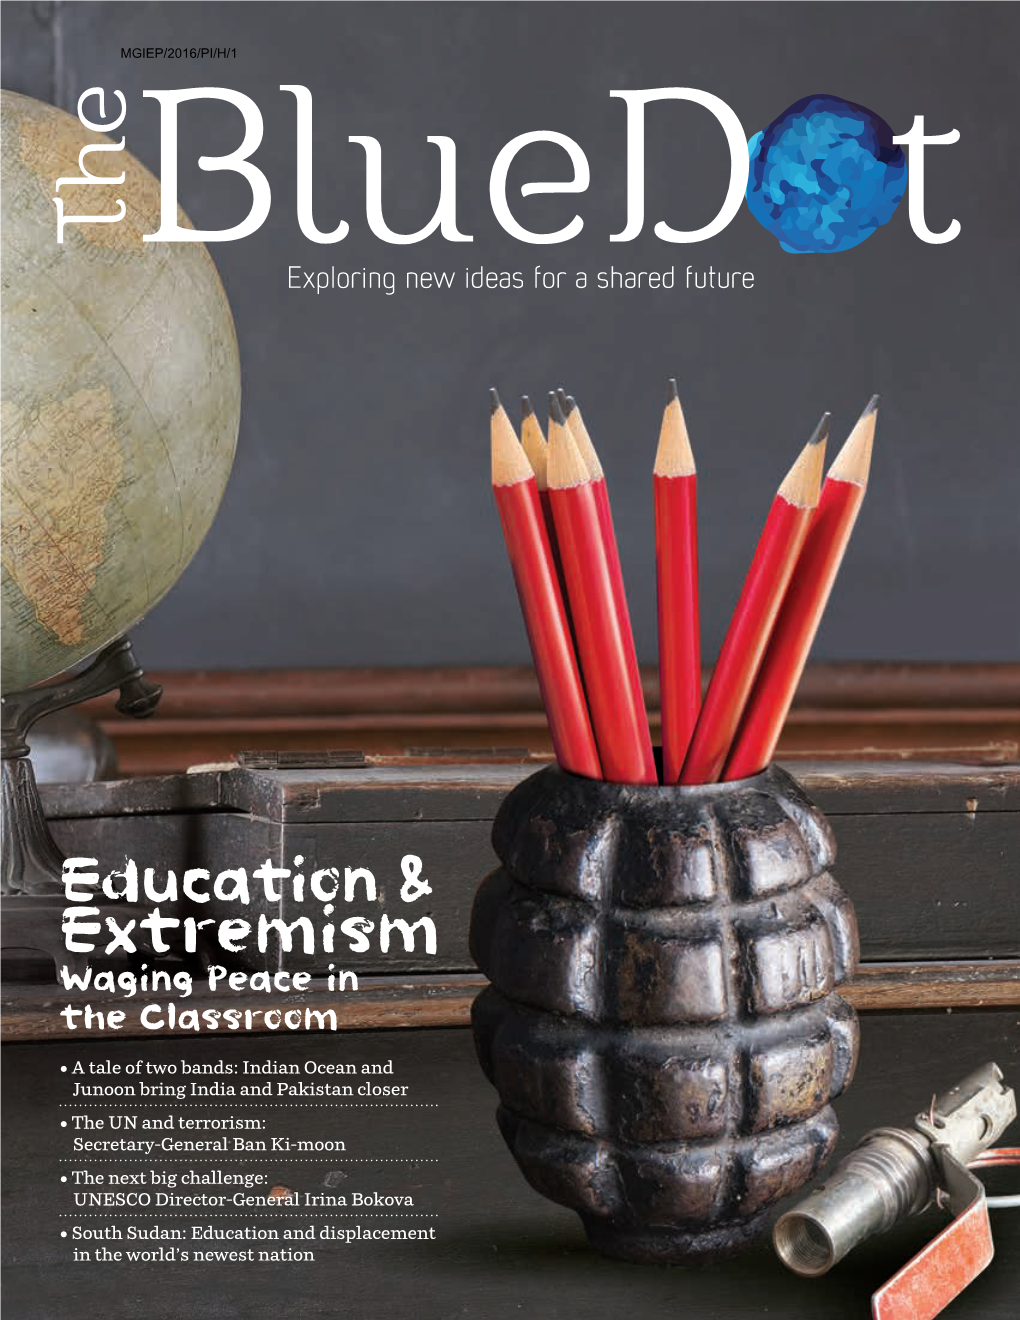 Education & Extremism: Waging Peace in the Classroom; Blue